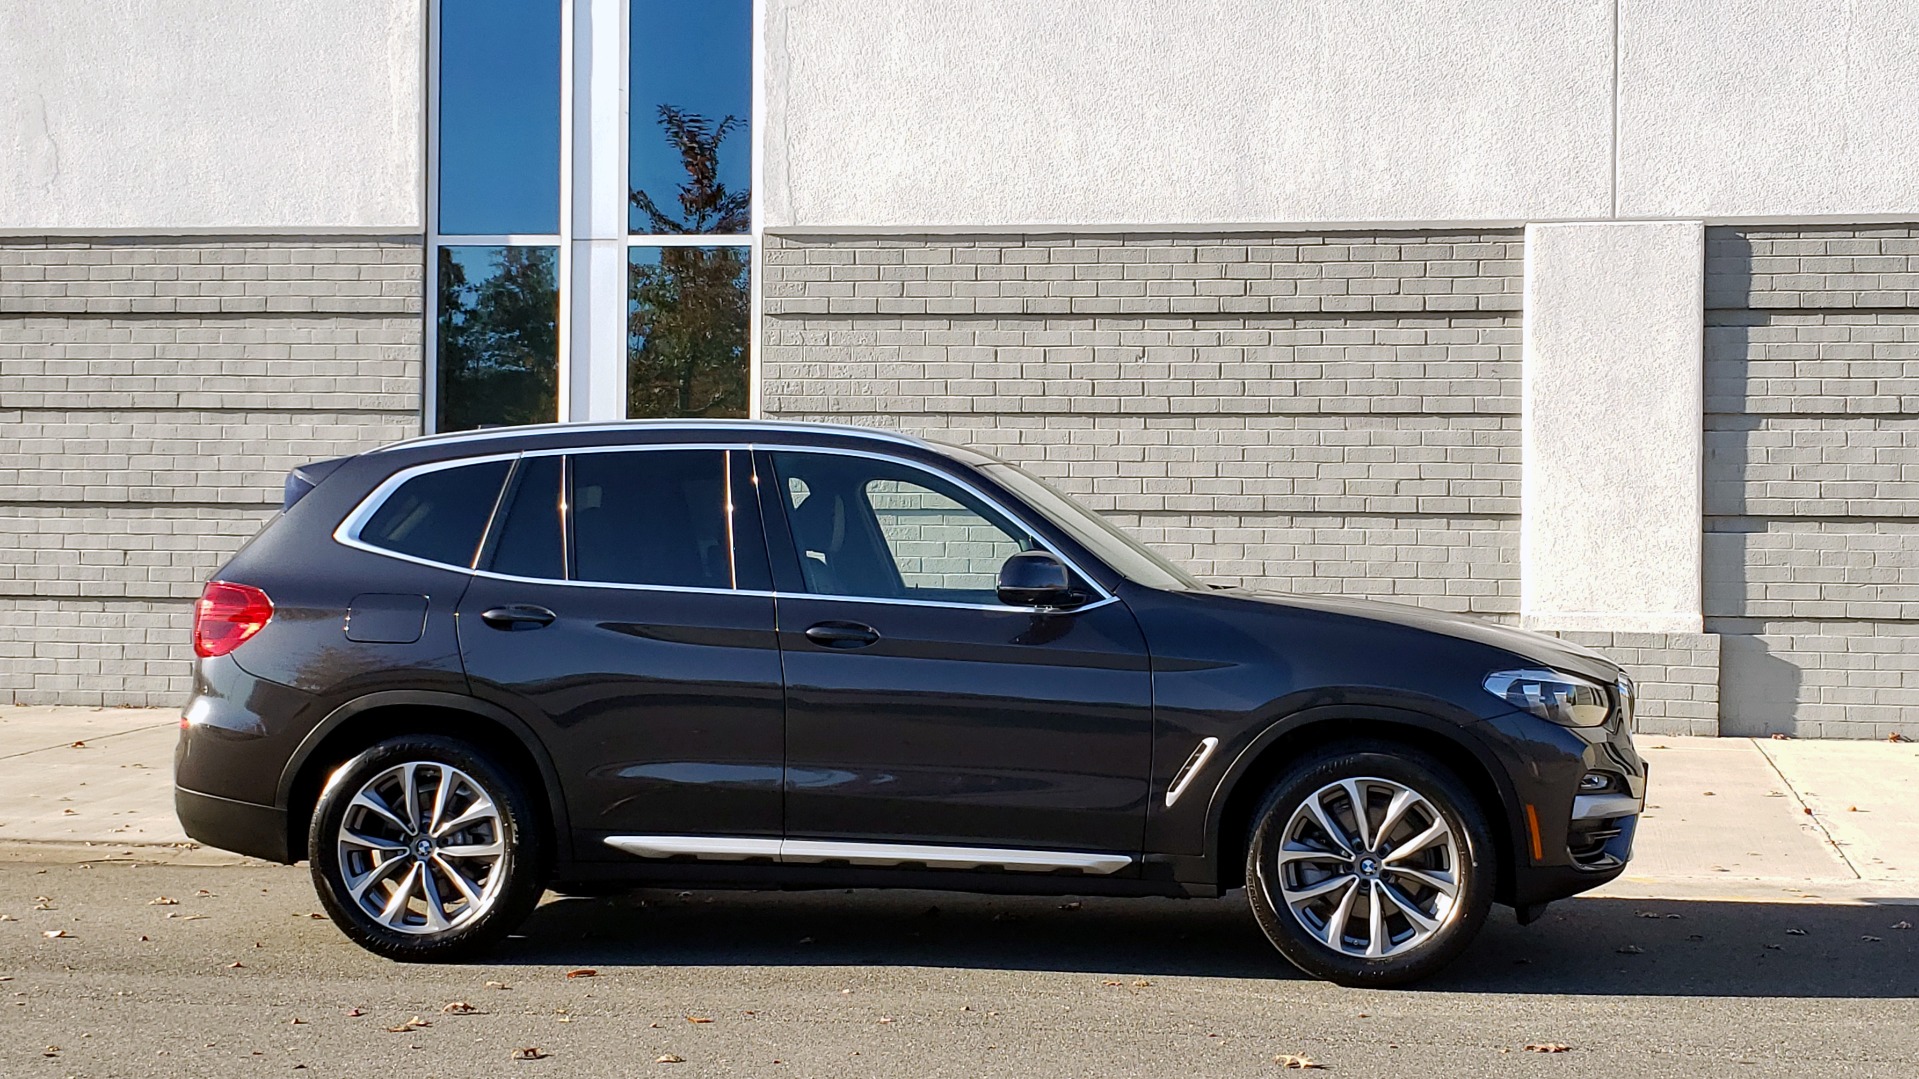 Used 2018 BMW X3 XDRIVE30I / NAV / PARK ASST / PANO-ROOF / HTD STS / REARVIEW for sale Sold at Formula Imports in Charlotte NC 28227 9